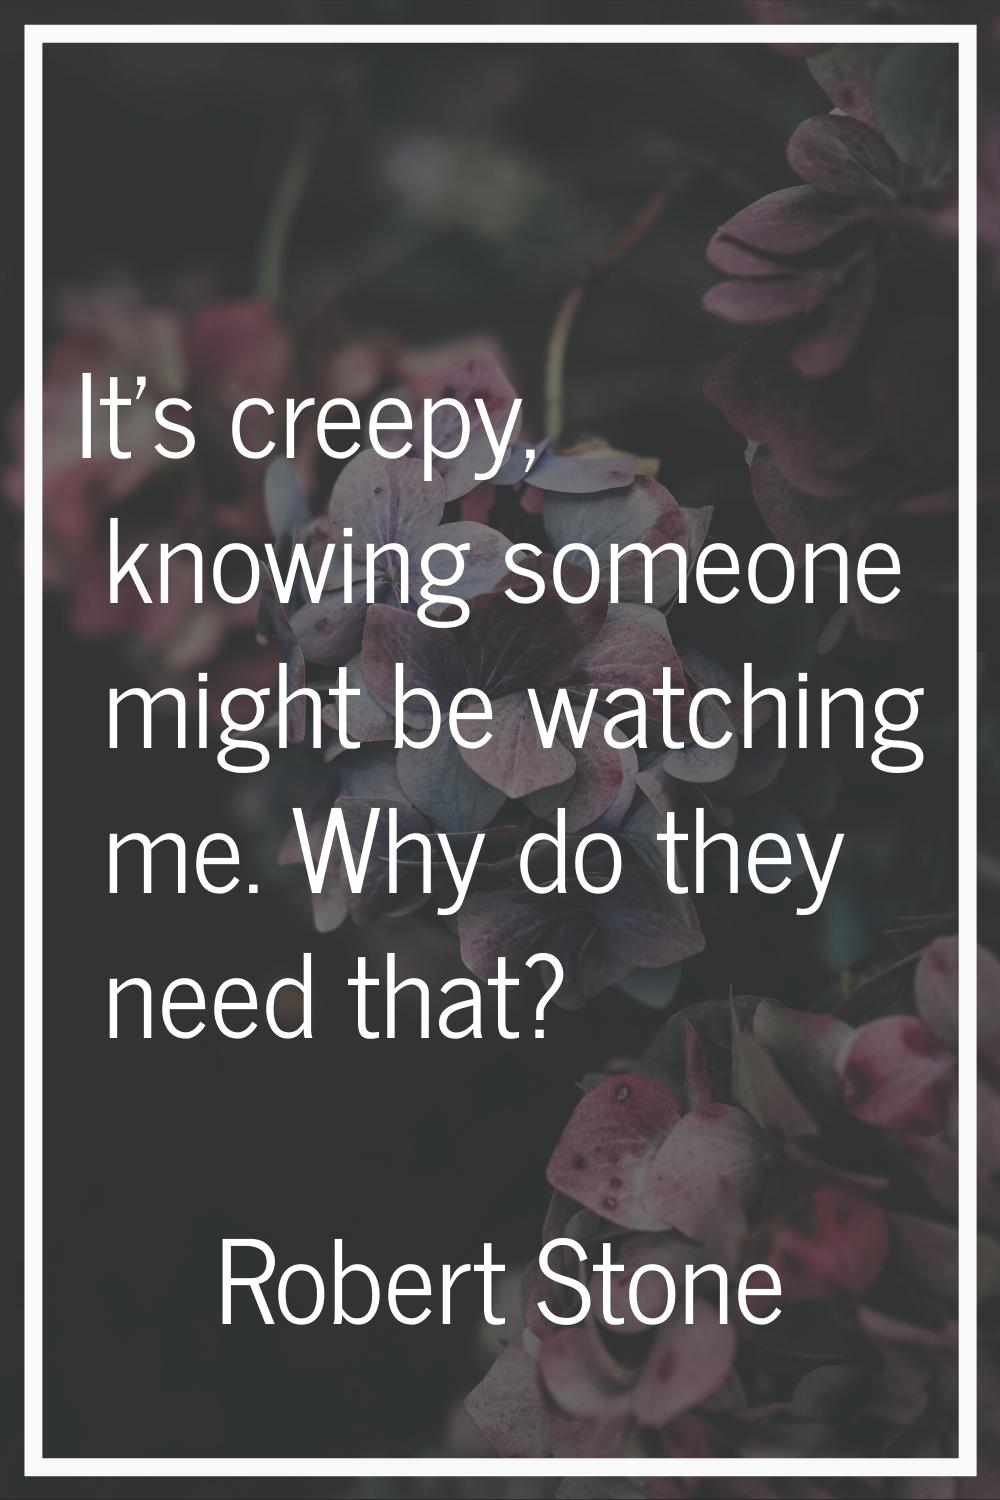 It's creepy, knowing someone might be watching me. Why do they need that?